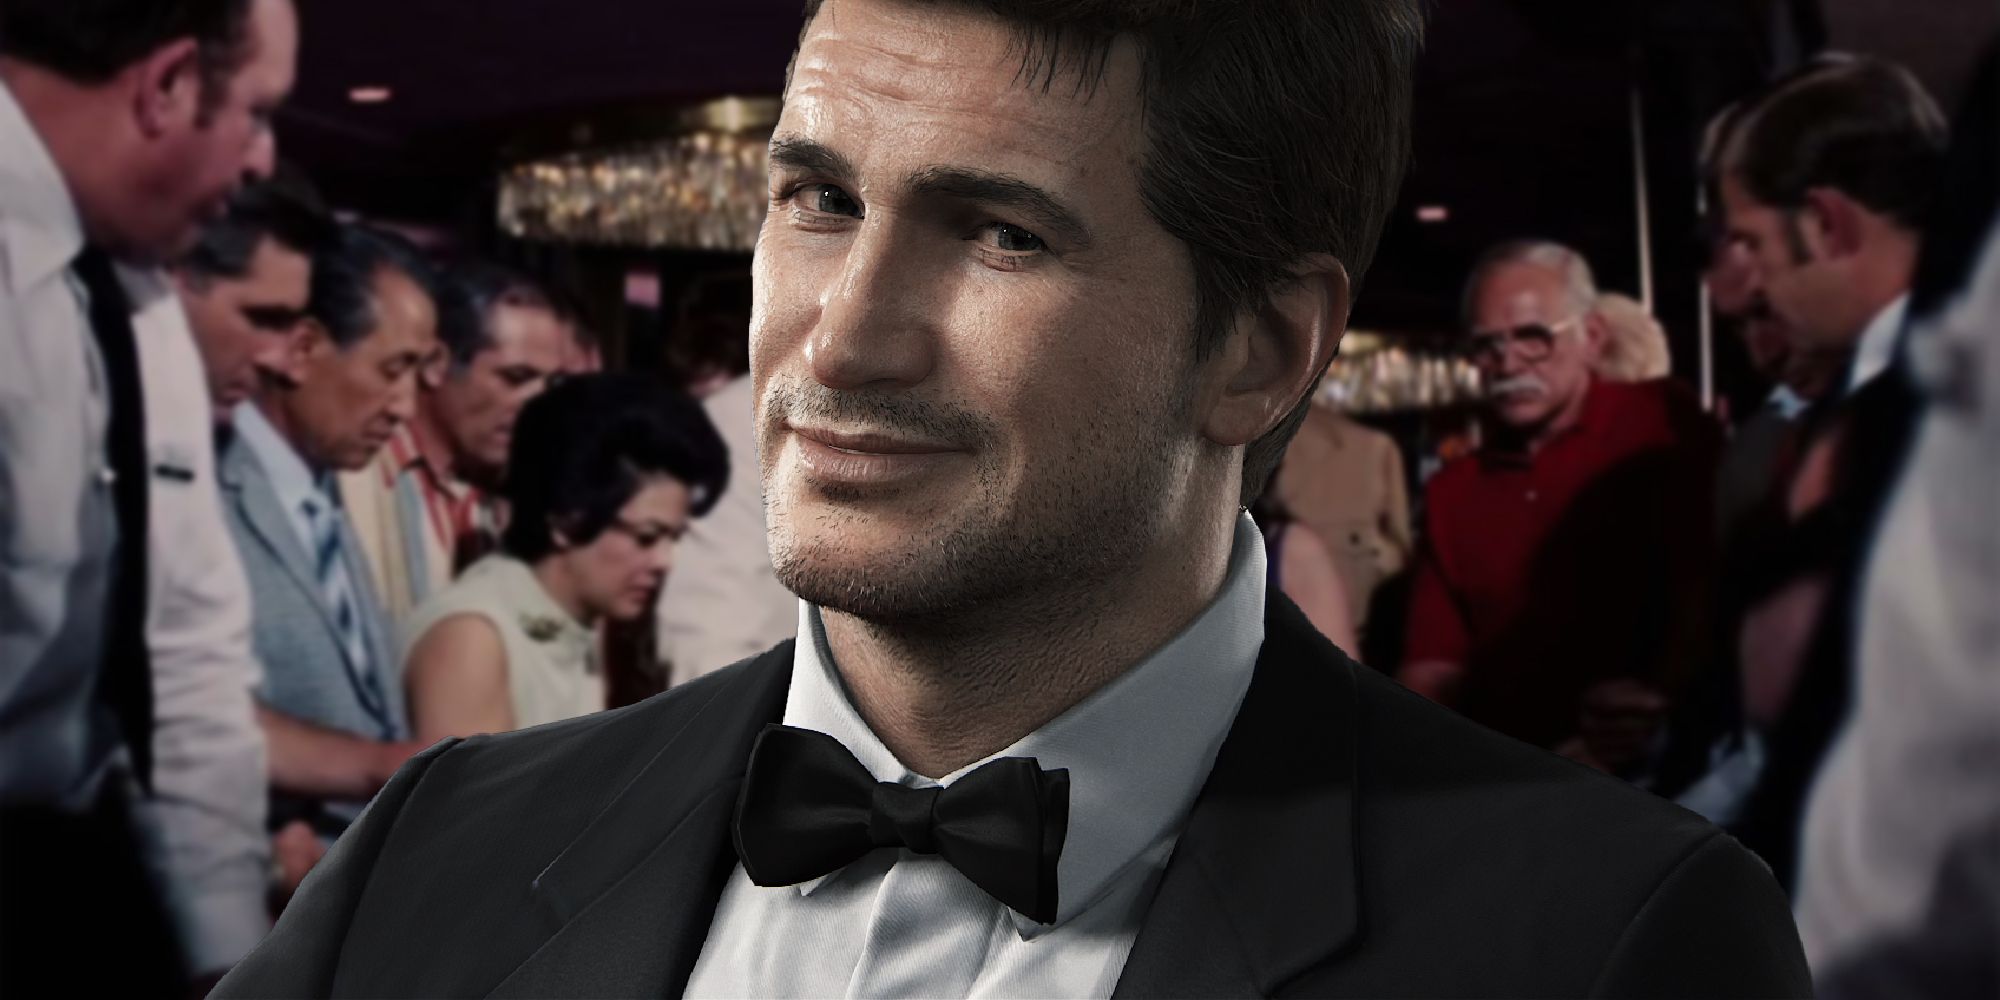 Uncharted James Bond - nathan drake in a tuxedo smiling wryly at the camera